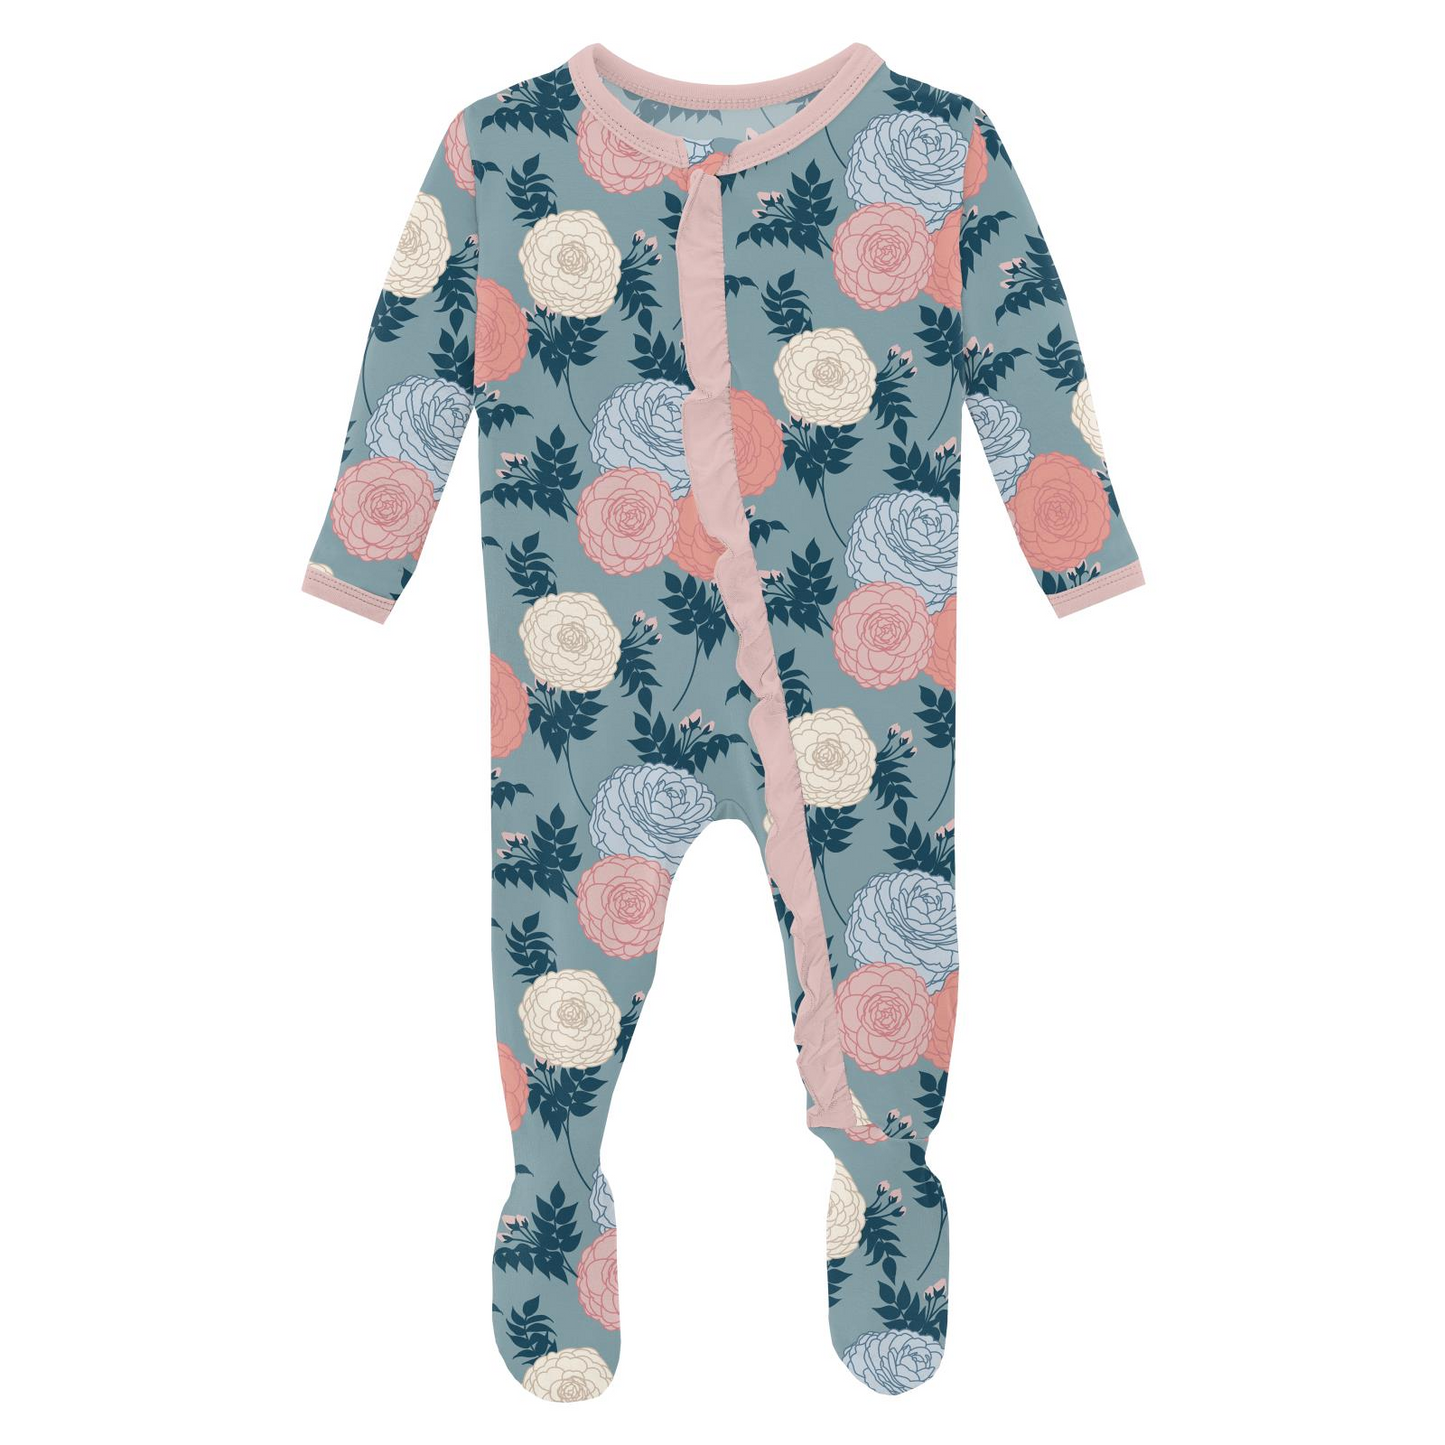 Classic Ruffle Footie with 2 Way Zipper, Stormy Sea Enchanted Floral